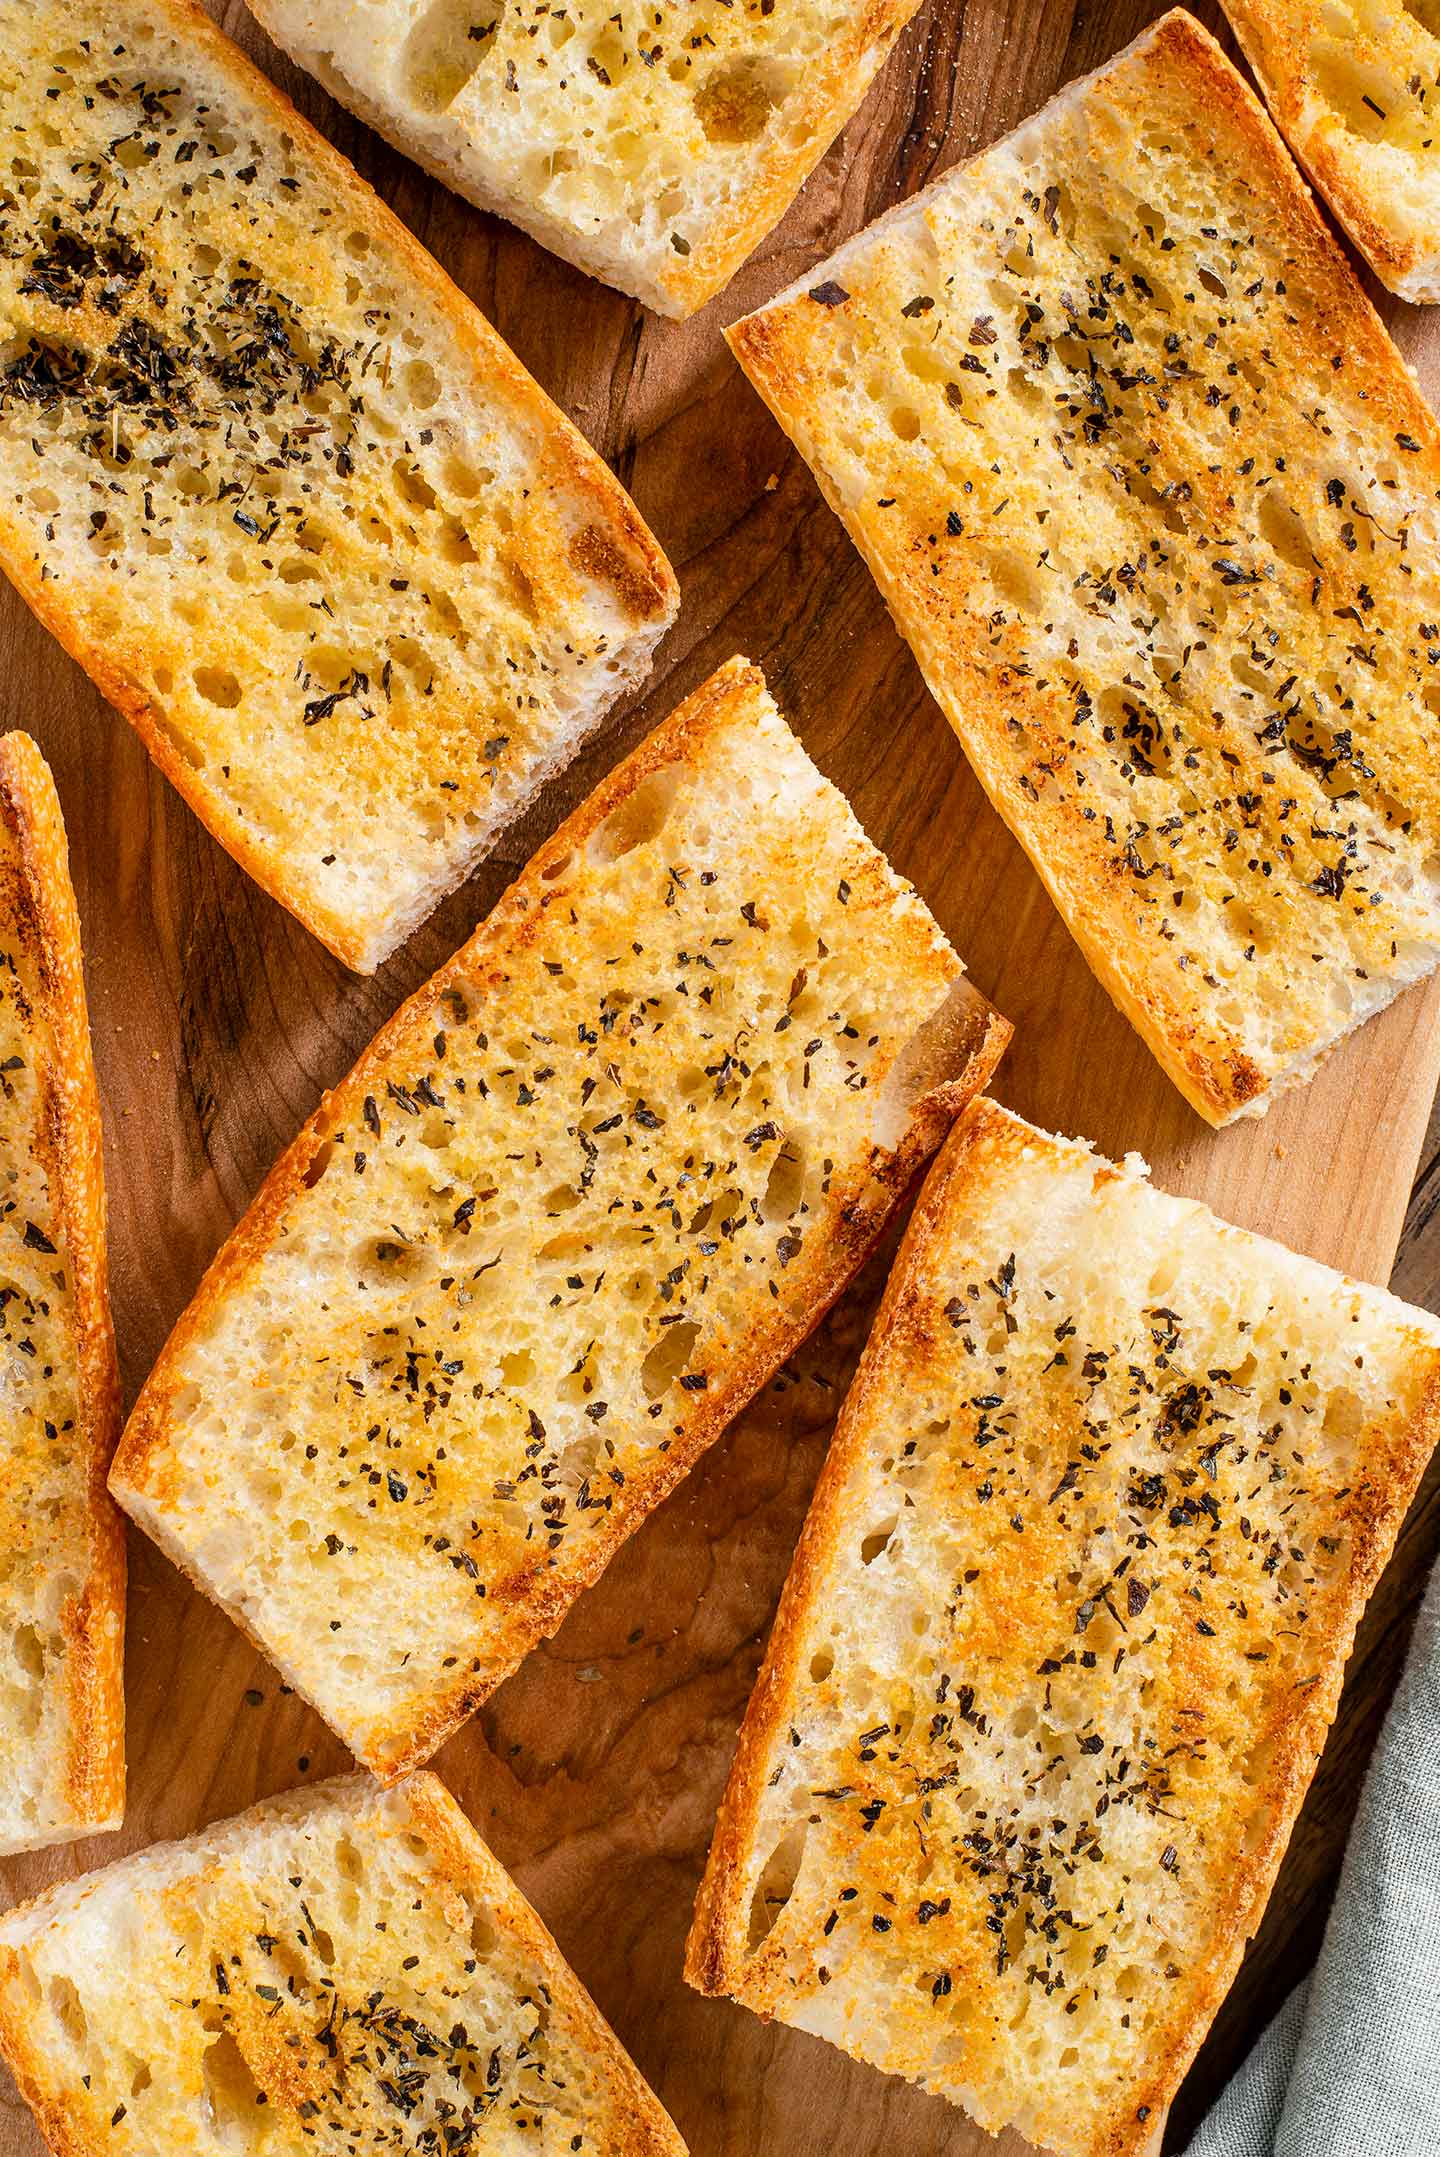 Top down view of golden slices of garlic bread on a wooden tray. The slices are sprinkled with garlic powder and dried basil.